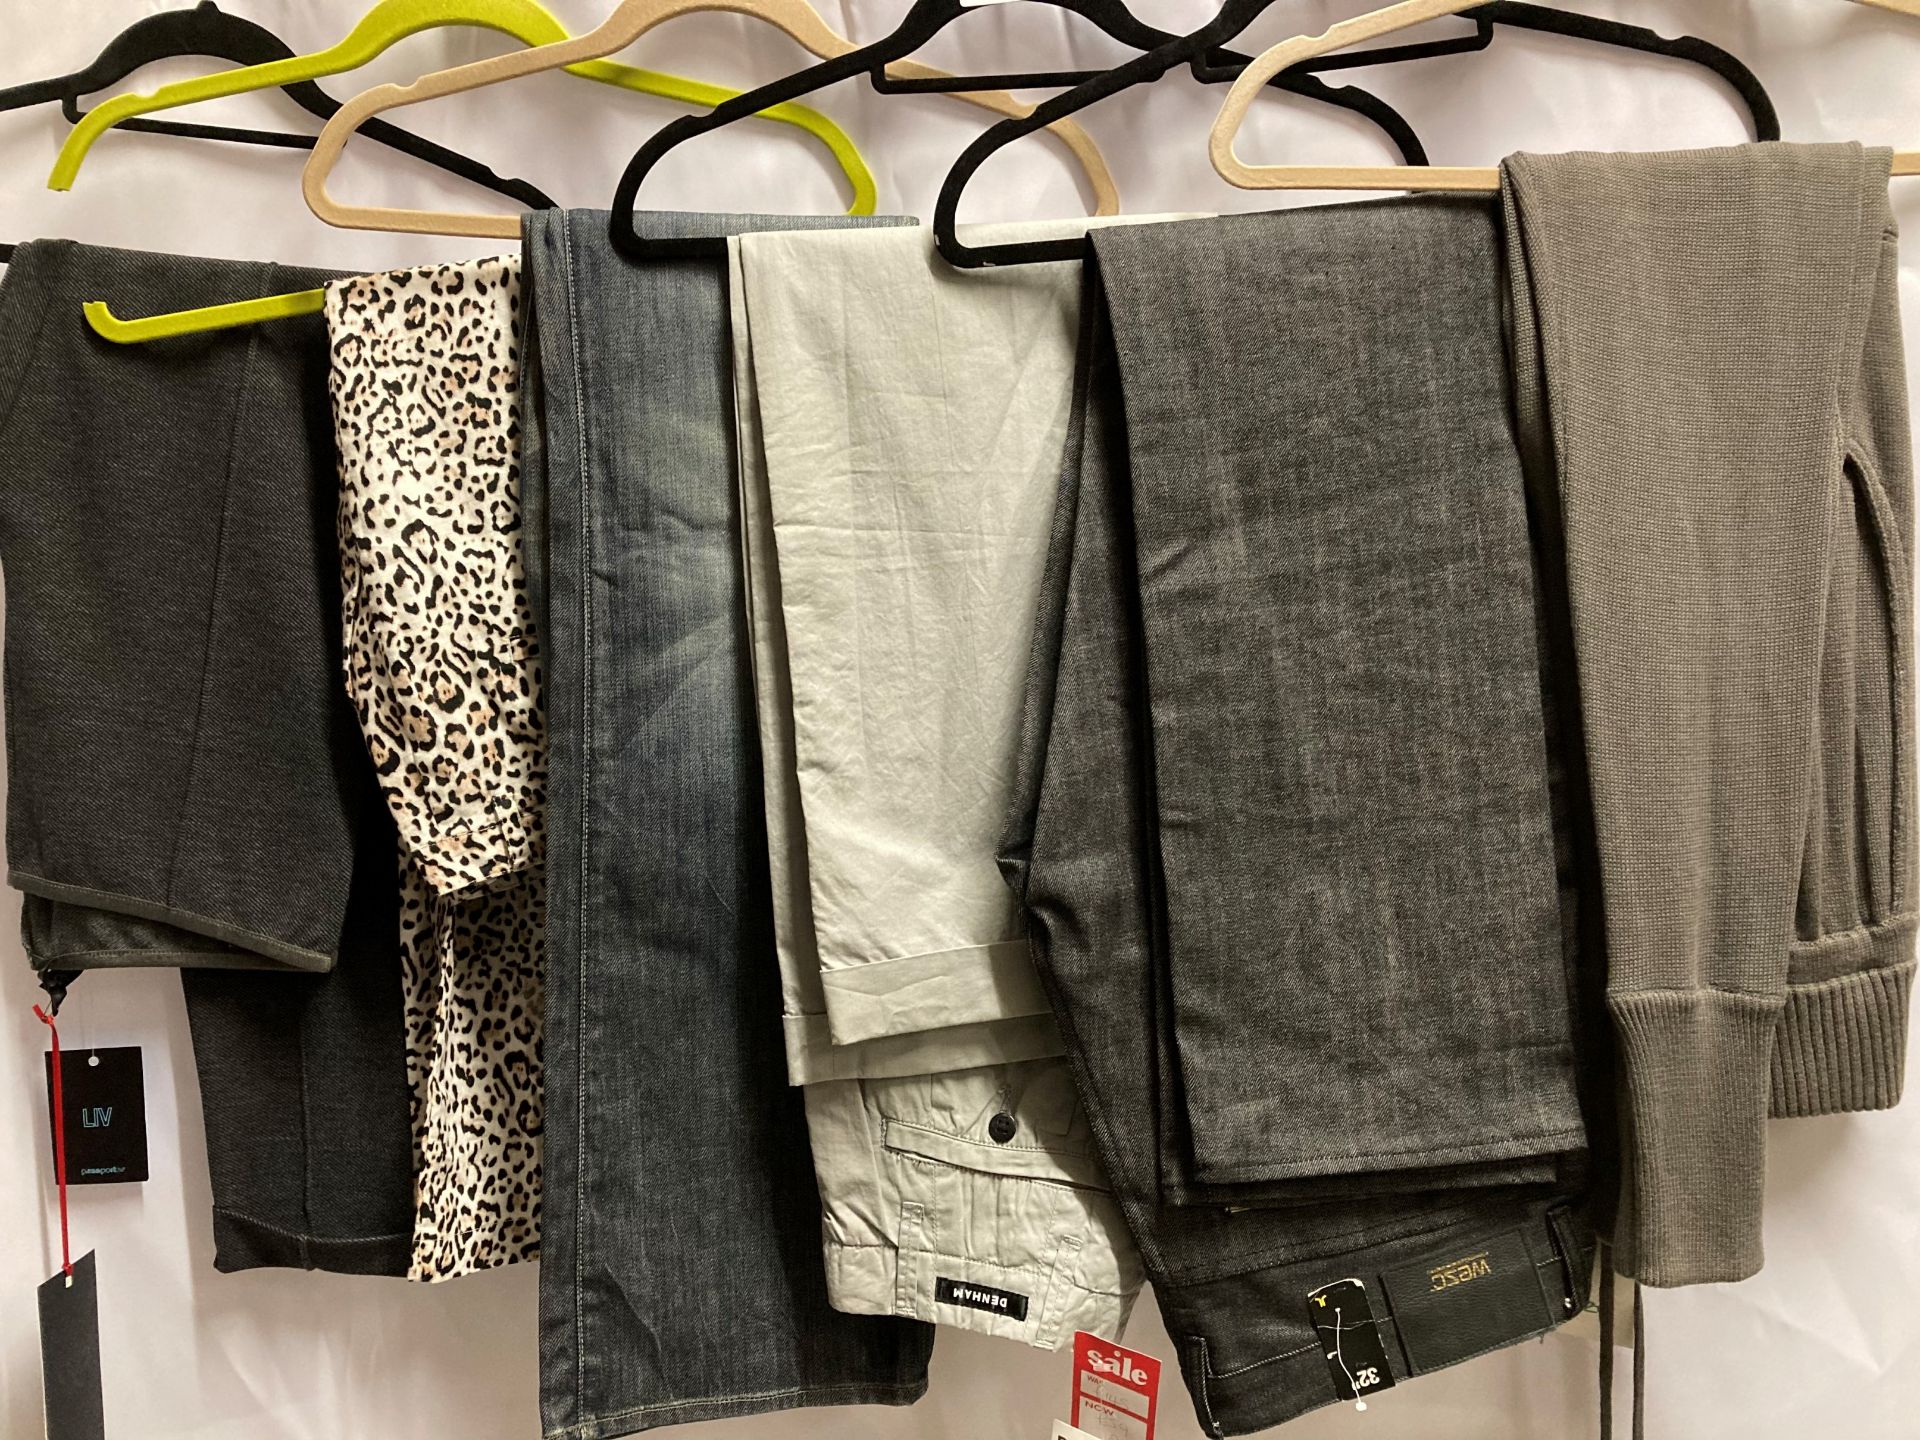 5 x assorted pairs of ladies trousers, leggings and jeans by Denham, Wezc and PAssport, etc.